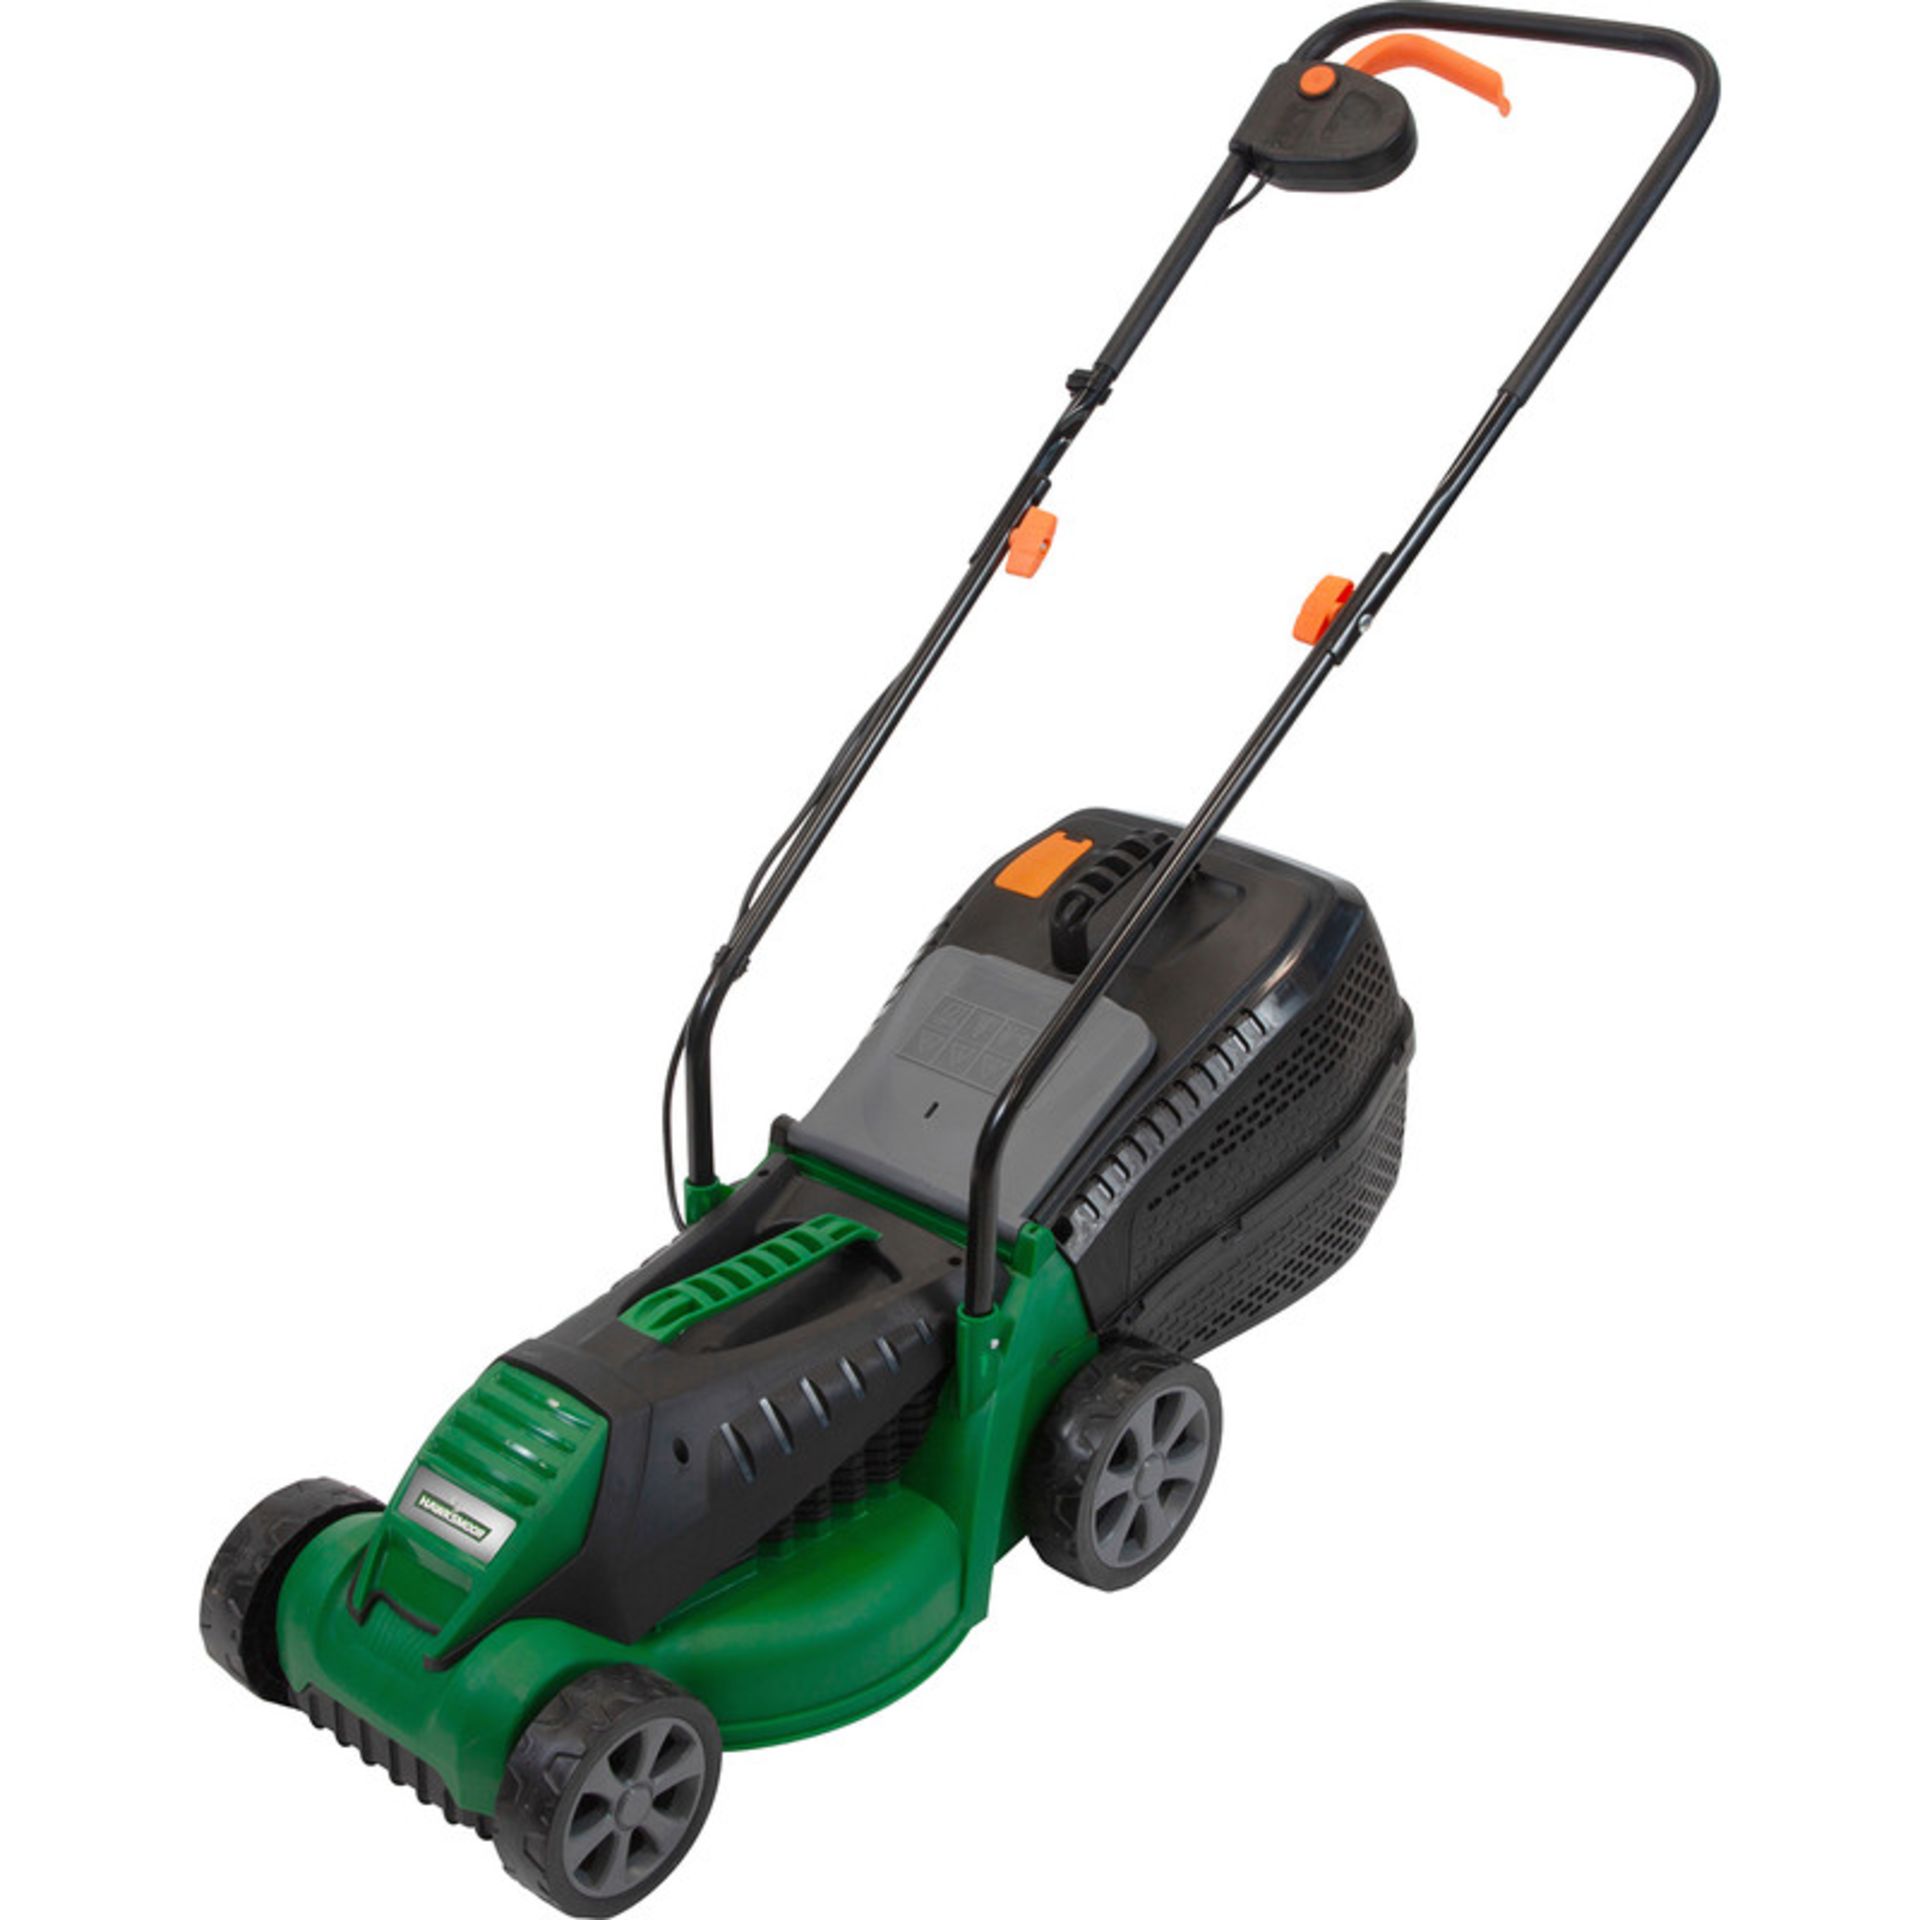 Hawksmoor 1200W 32cm Electric Lawnmower 230V. Take the hassle out of cutting your grass with this